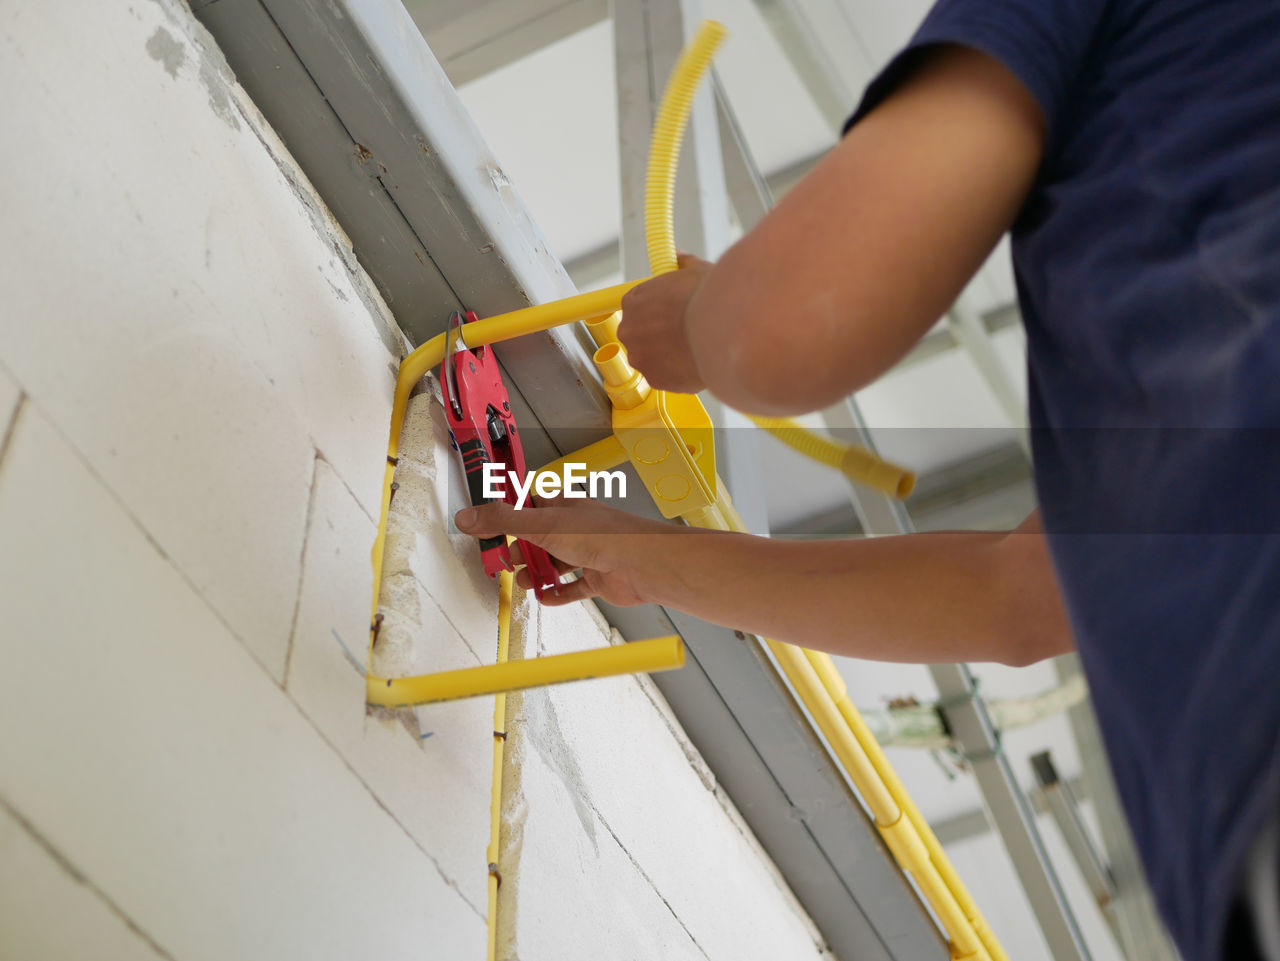 Cutting pvc pipe, during electrical system installation, using a cutter for electrical conduit